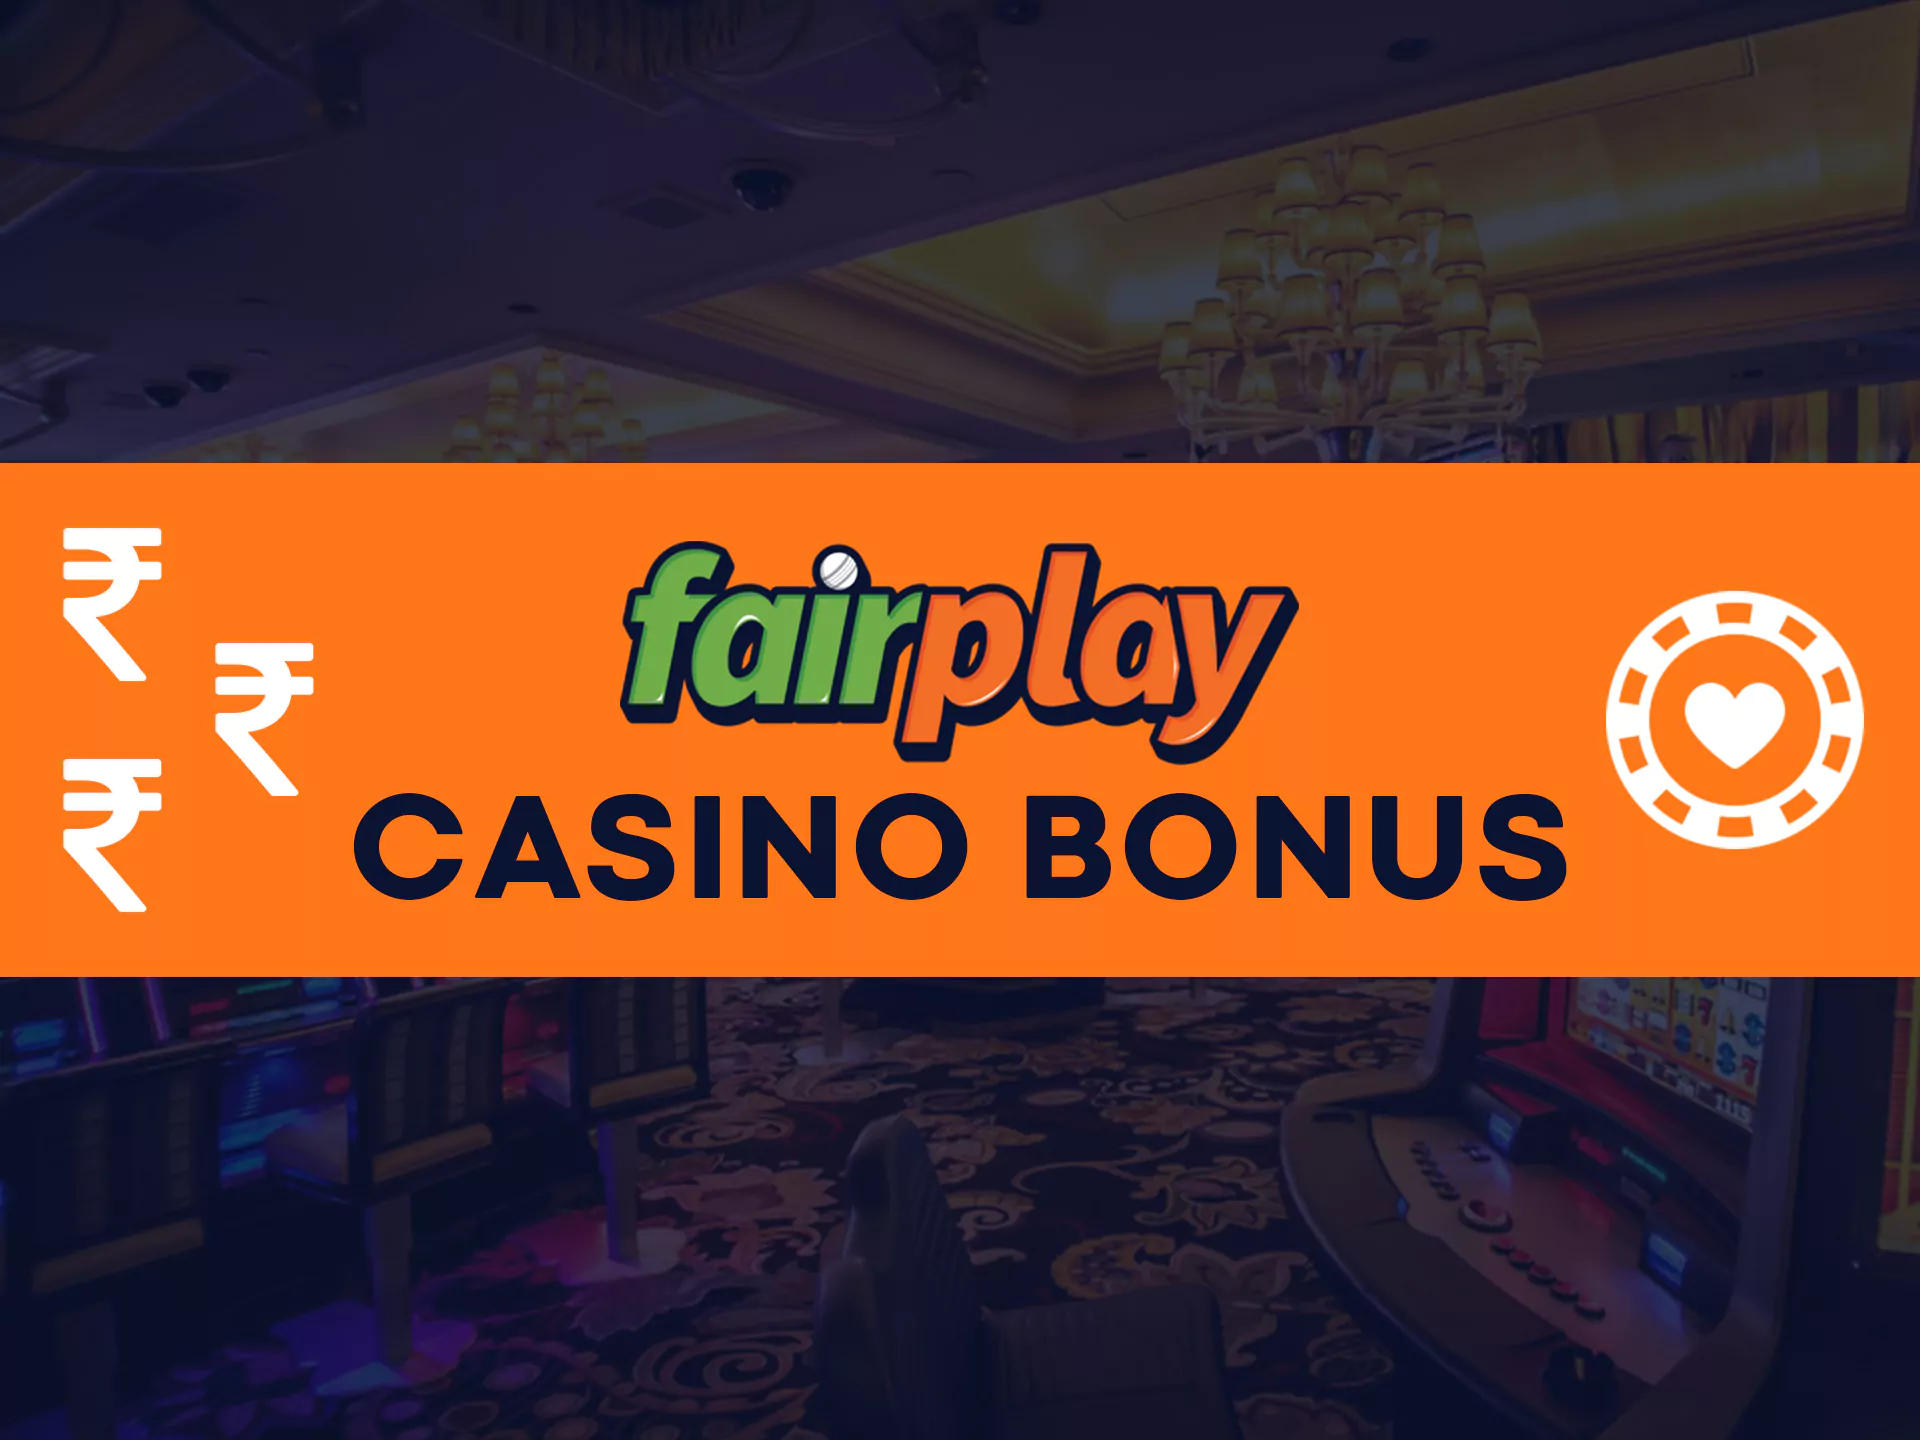 Get bonuses for playing at Fairplay online casino.